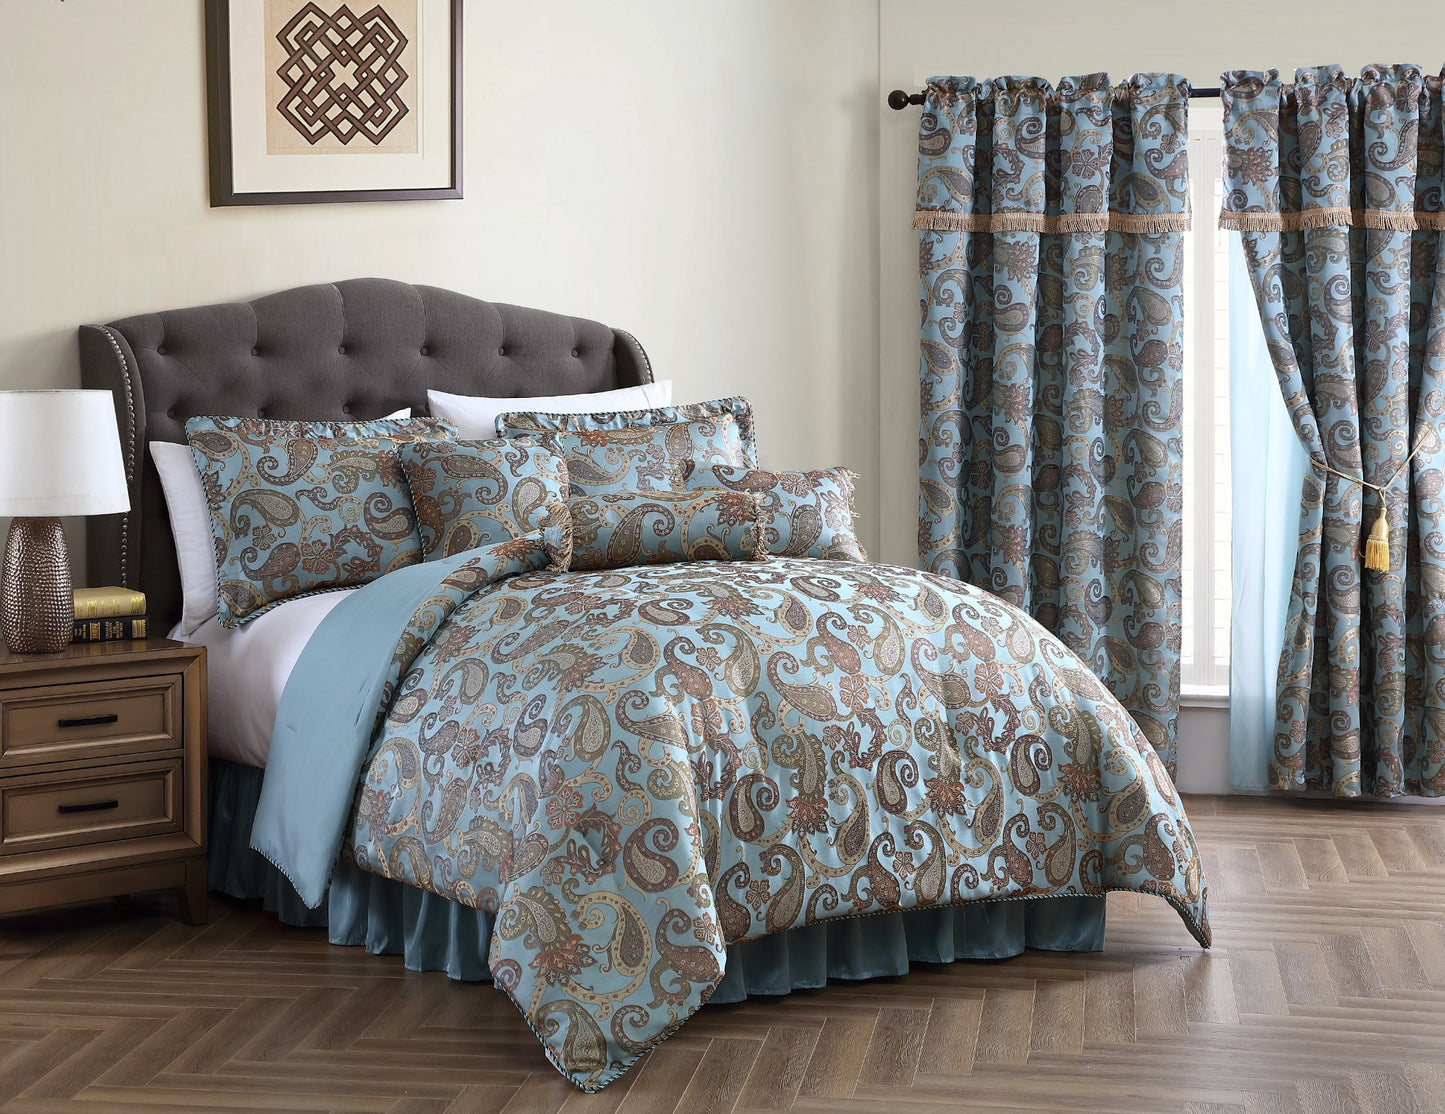 Adelle 7-Piece Paisley Jacquard Embroidered Comforter